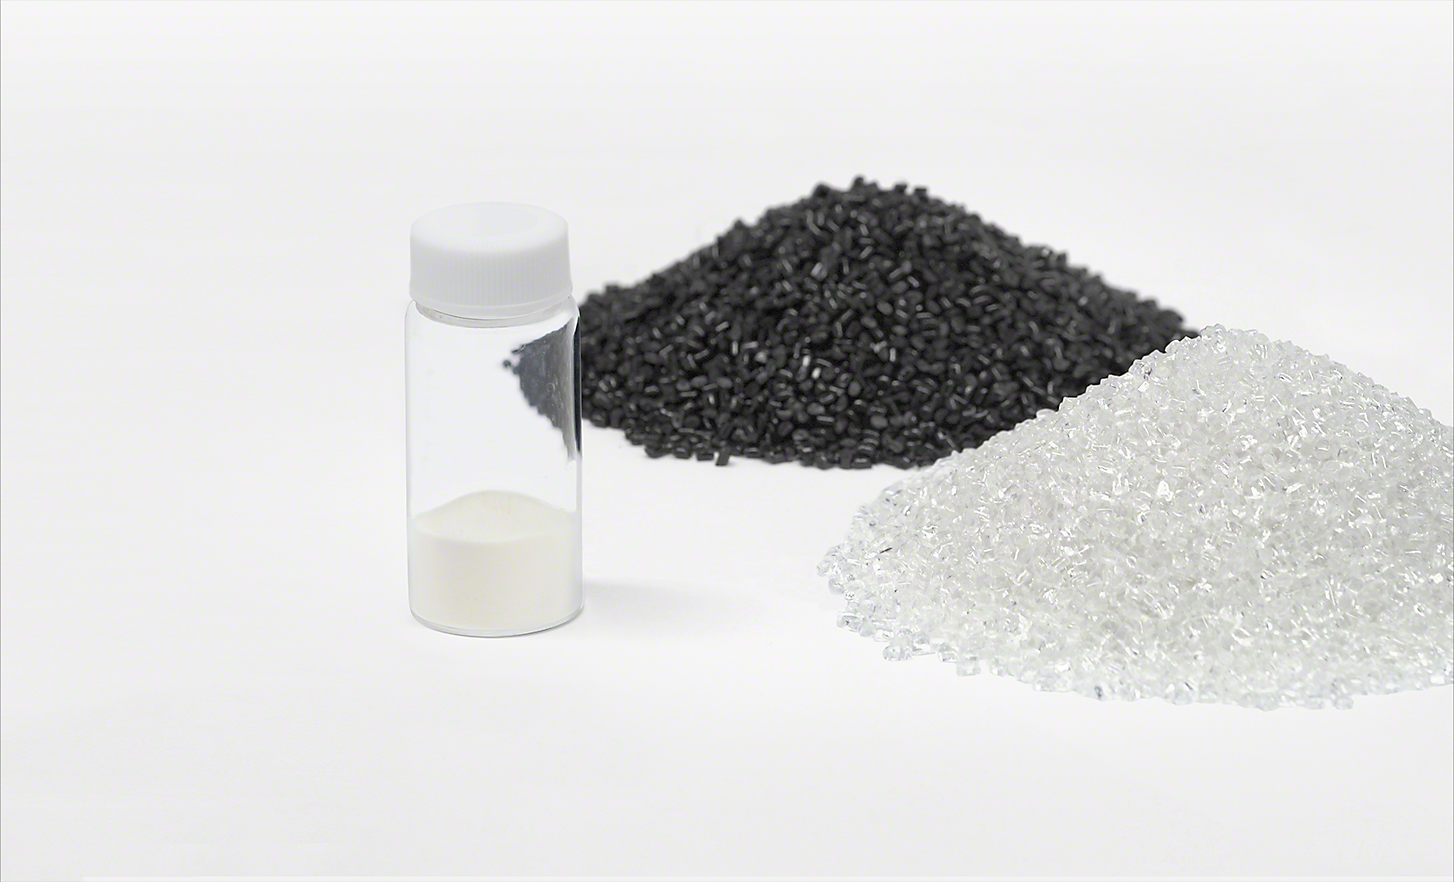 A vial of recycled plastic material alongside a pile of black plastic fragments and a pile of white plastic fragments